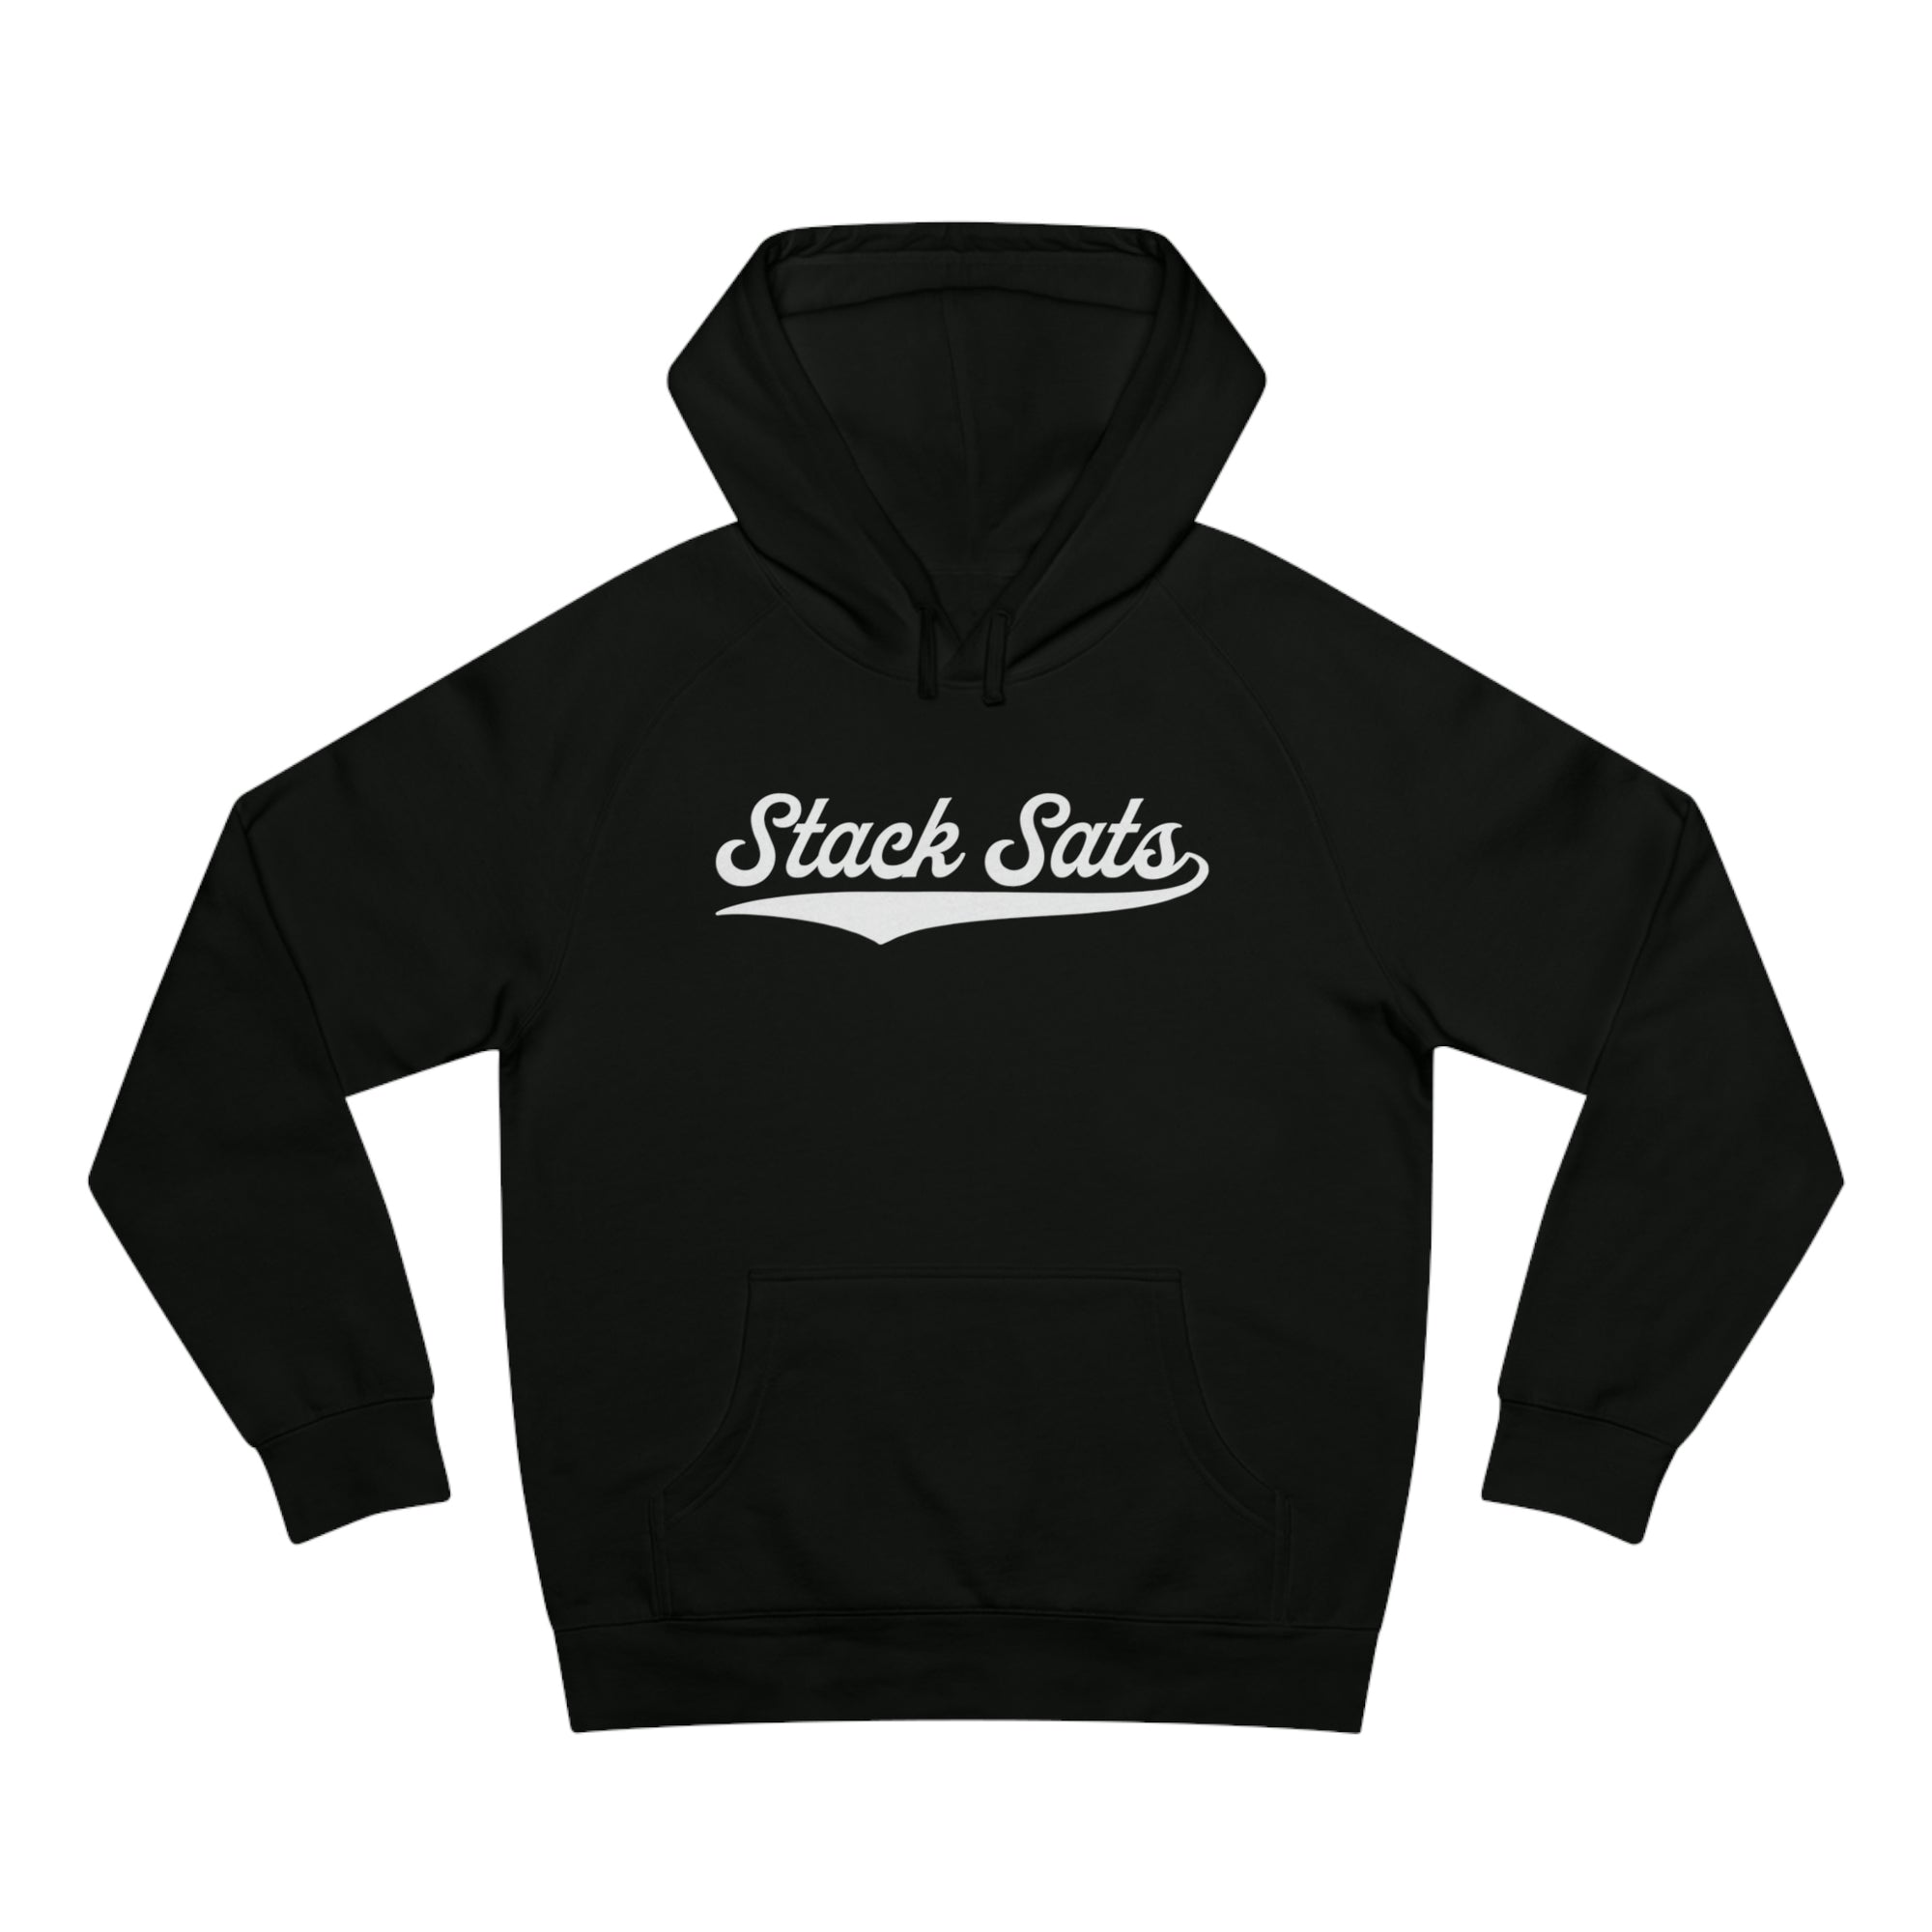 Bitcoin Hoodie - Our Stack Sats Hoodie features a white logo design on a black hoodie. Front view.